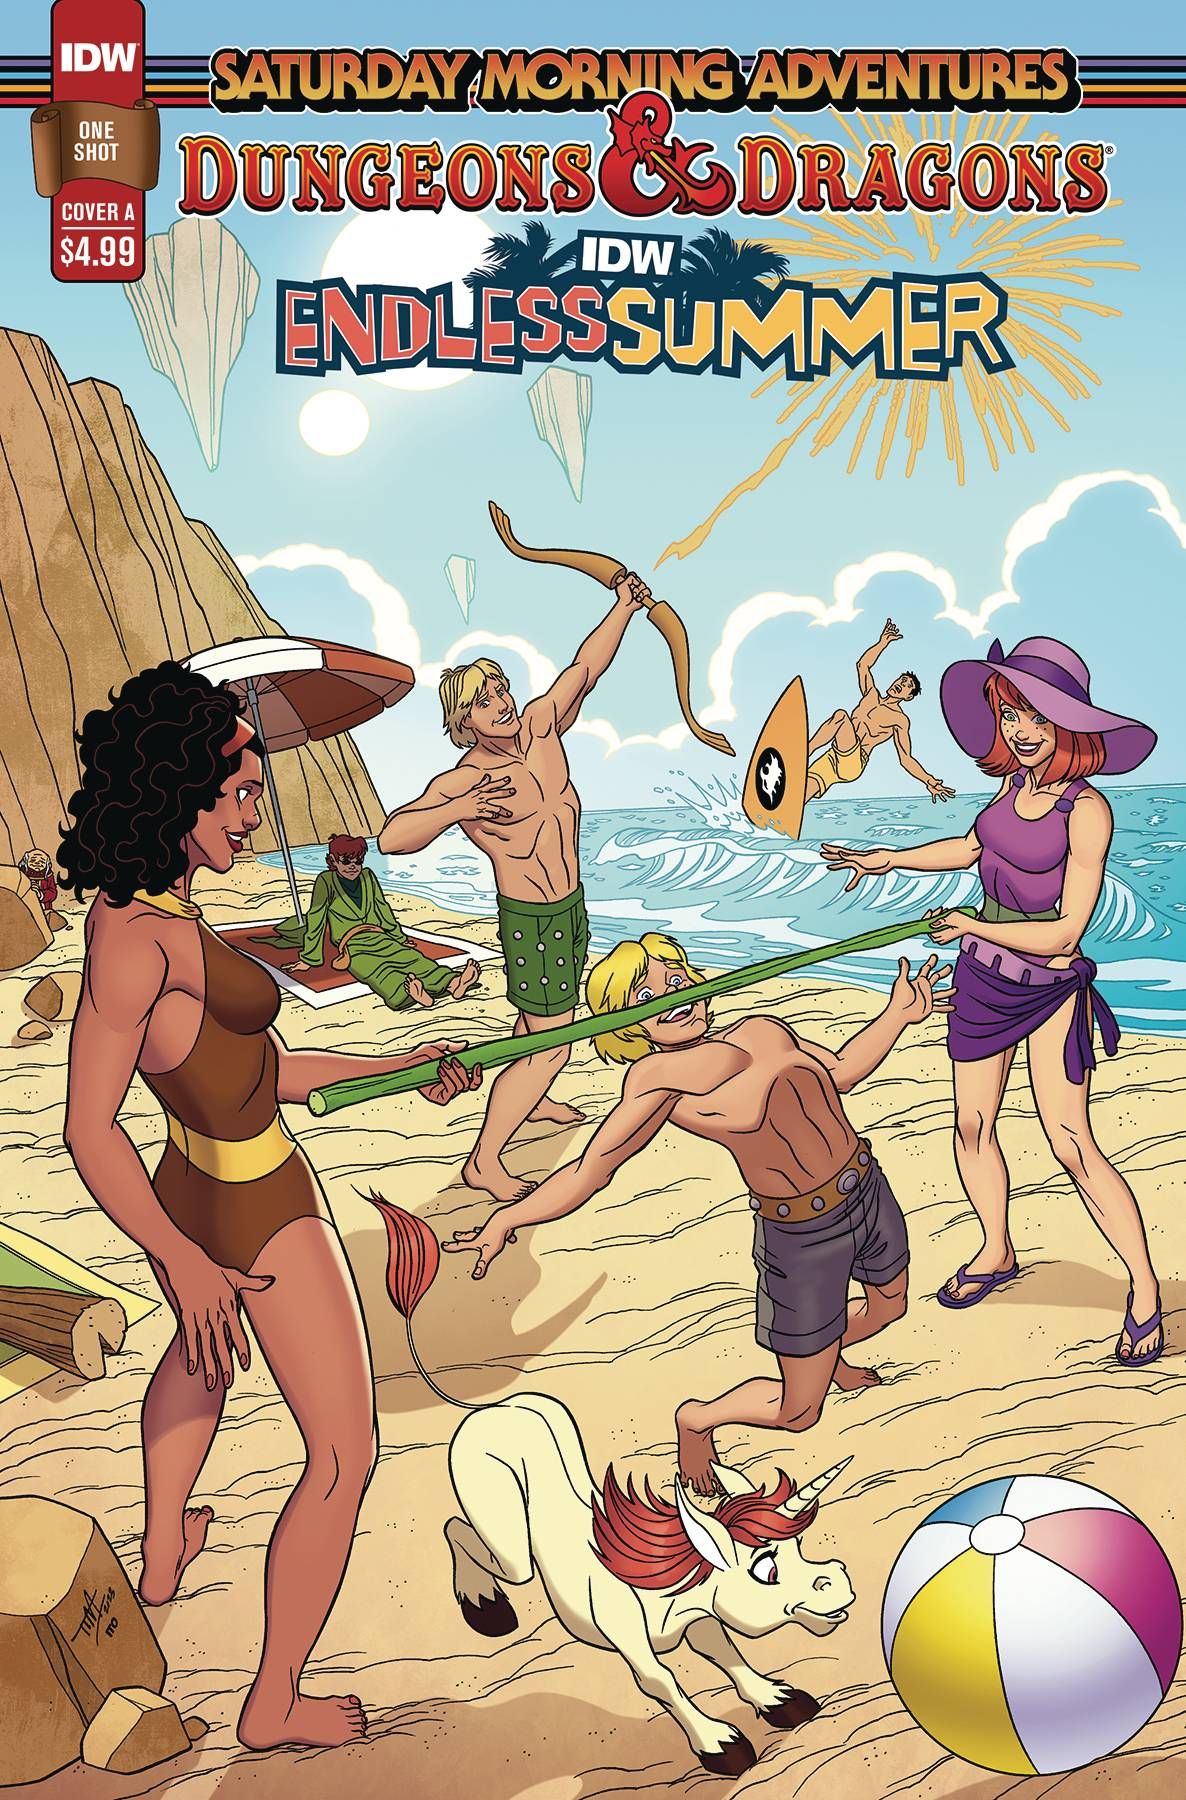 IDW Endless Summer Dungeons & Dragons: Saturday Morning Adventures Comic